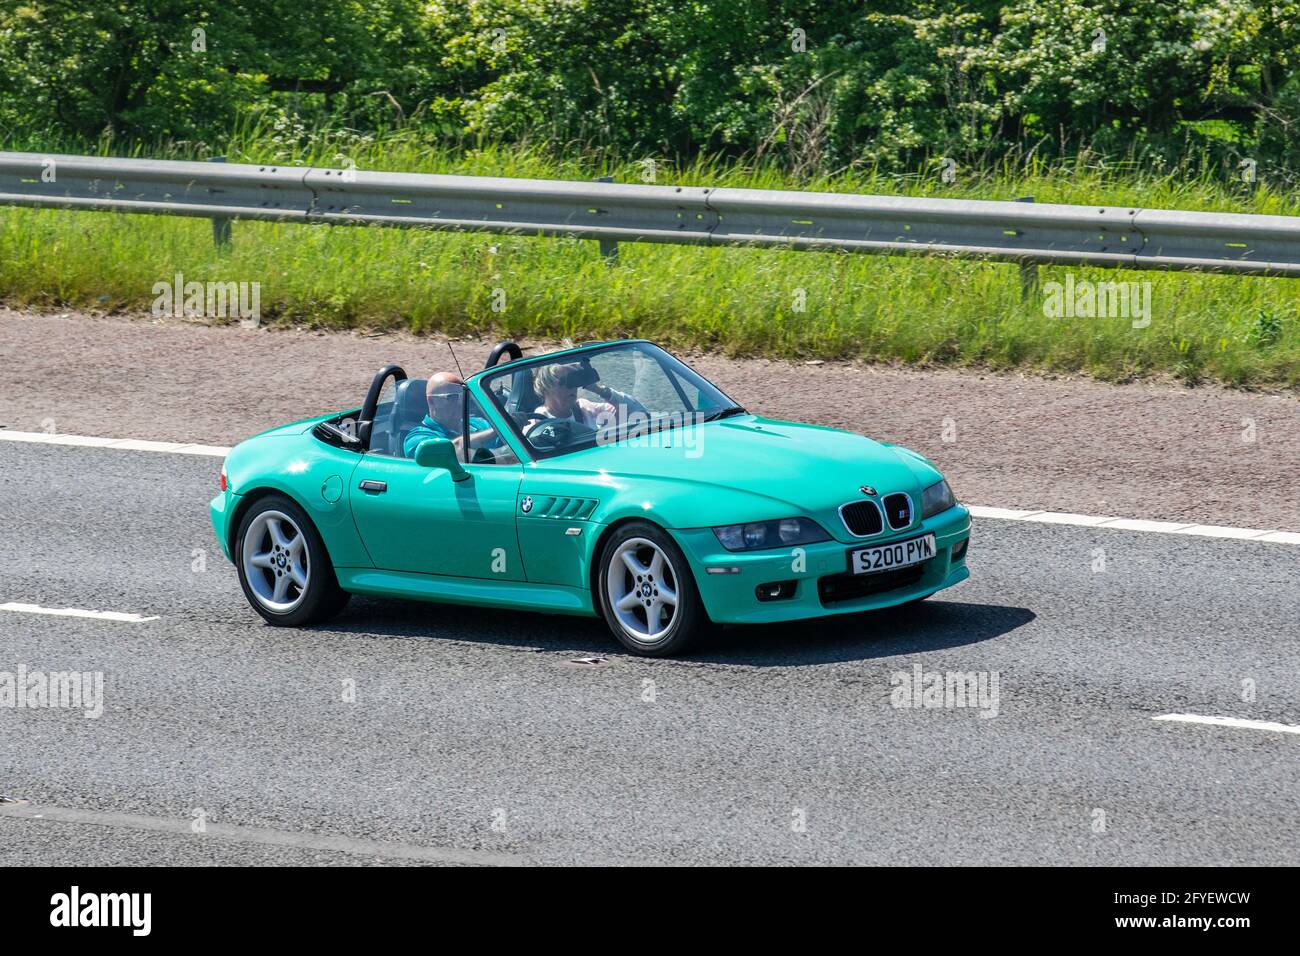 1999 90s Green BMW Z3 2793cc roadster; Vehicular traffic, moving vehicles, convertible cars, vehicle driving on UK roads, motors, motoring on the M6 motorway UK road network. Stock Photo